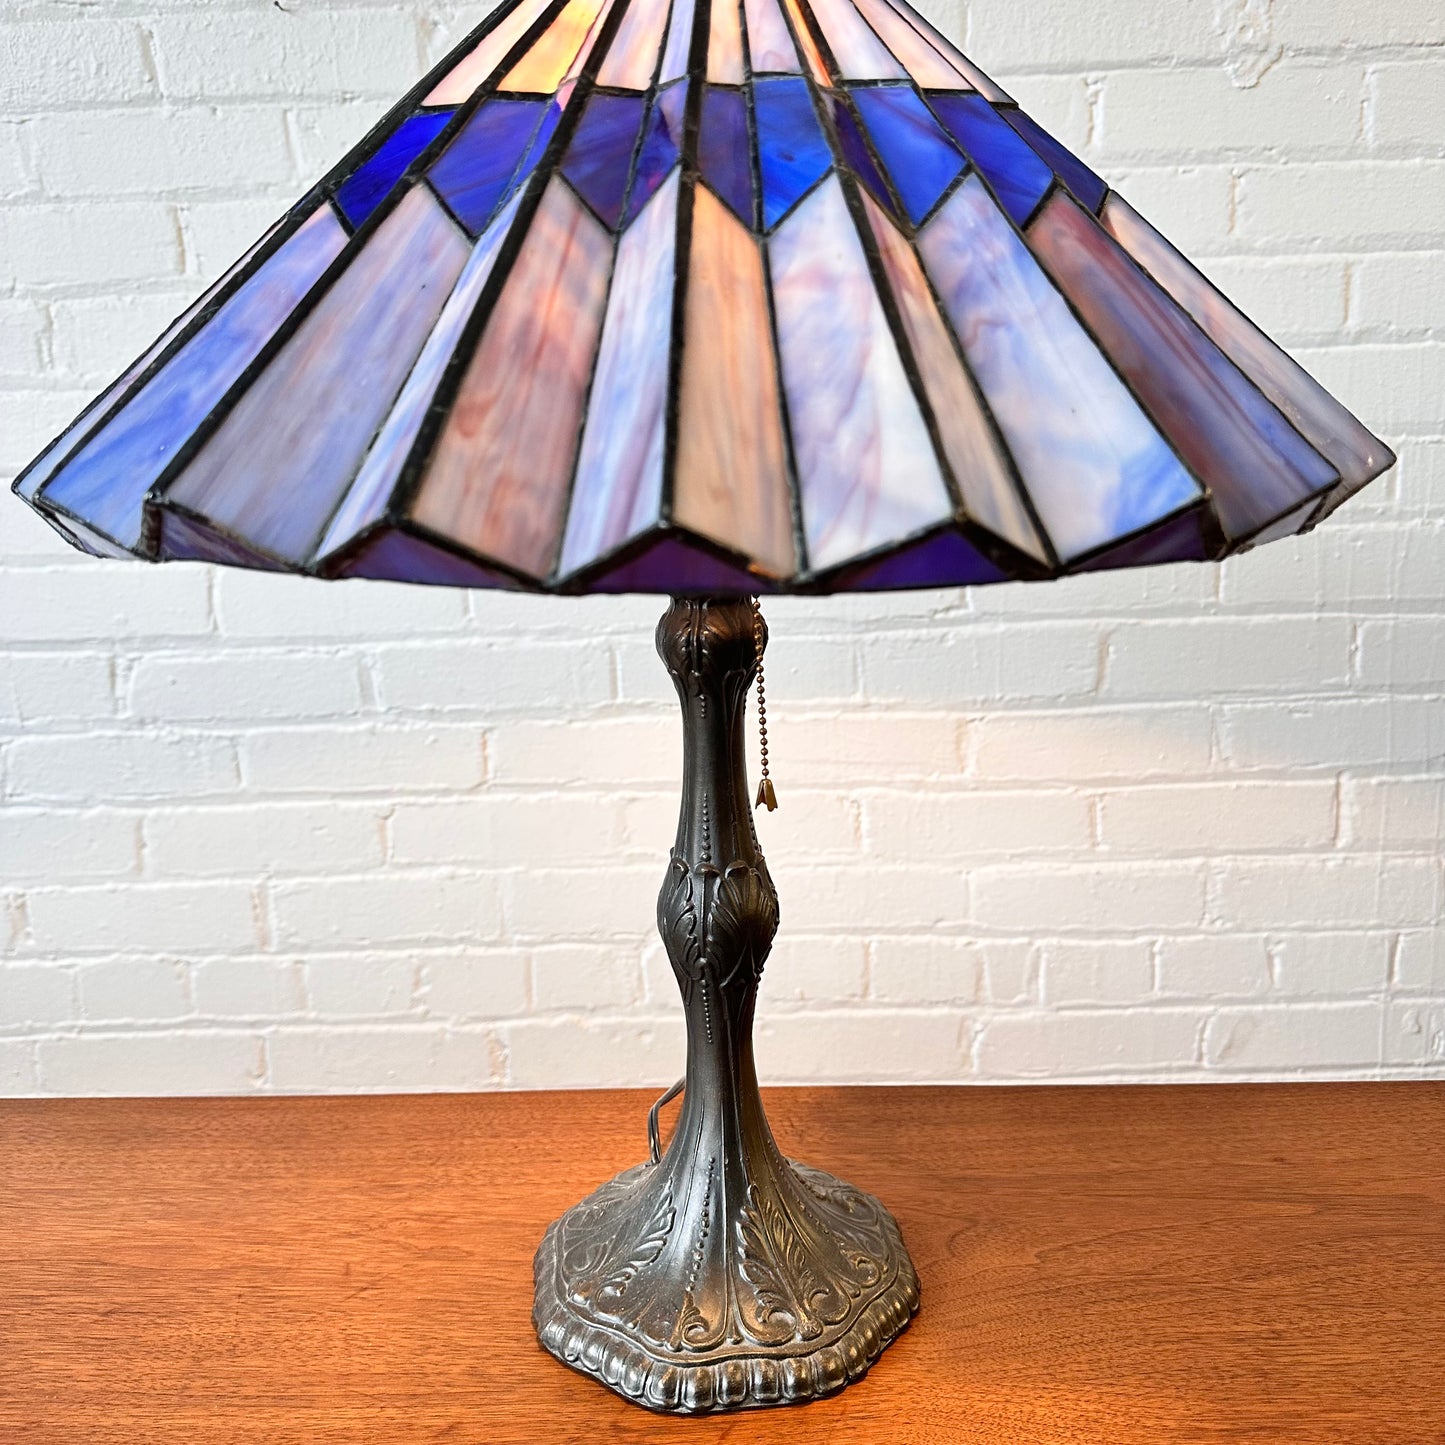 ART DECO ACCORDIAN STYLE BLUE STAINED GLASS TABLE LAMP